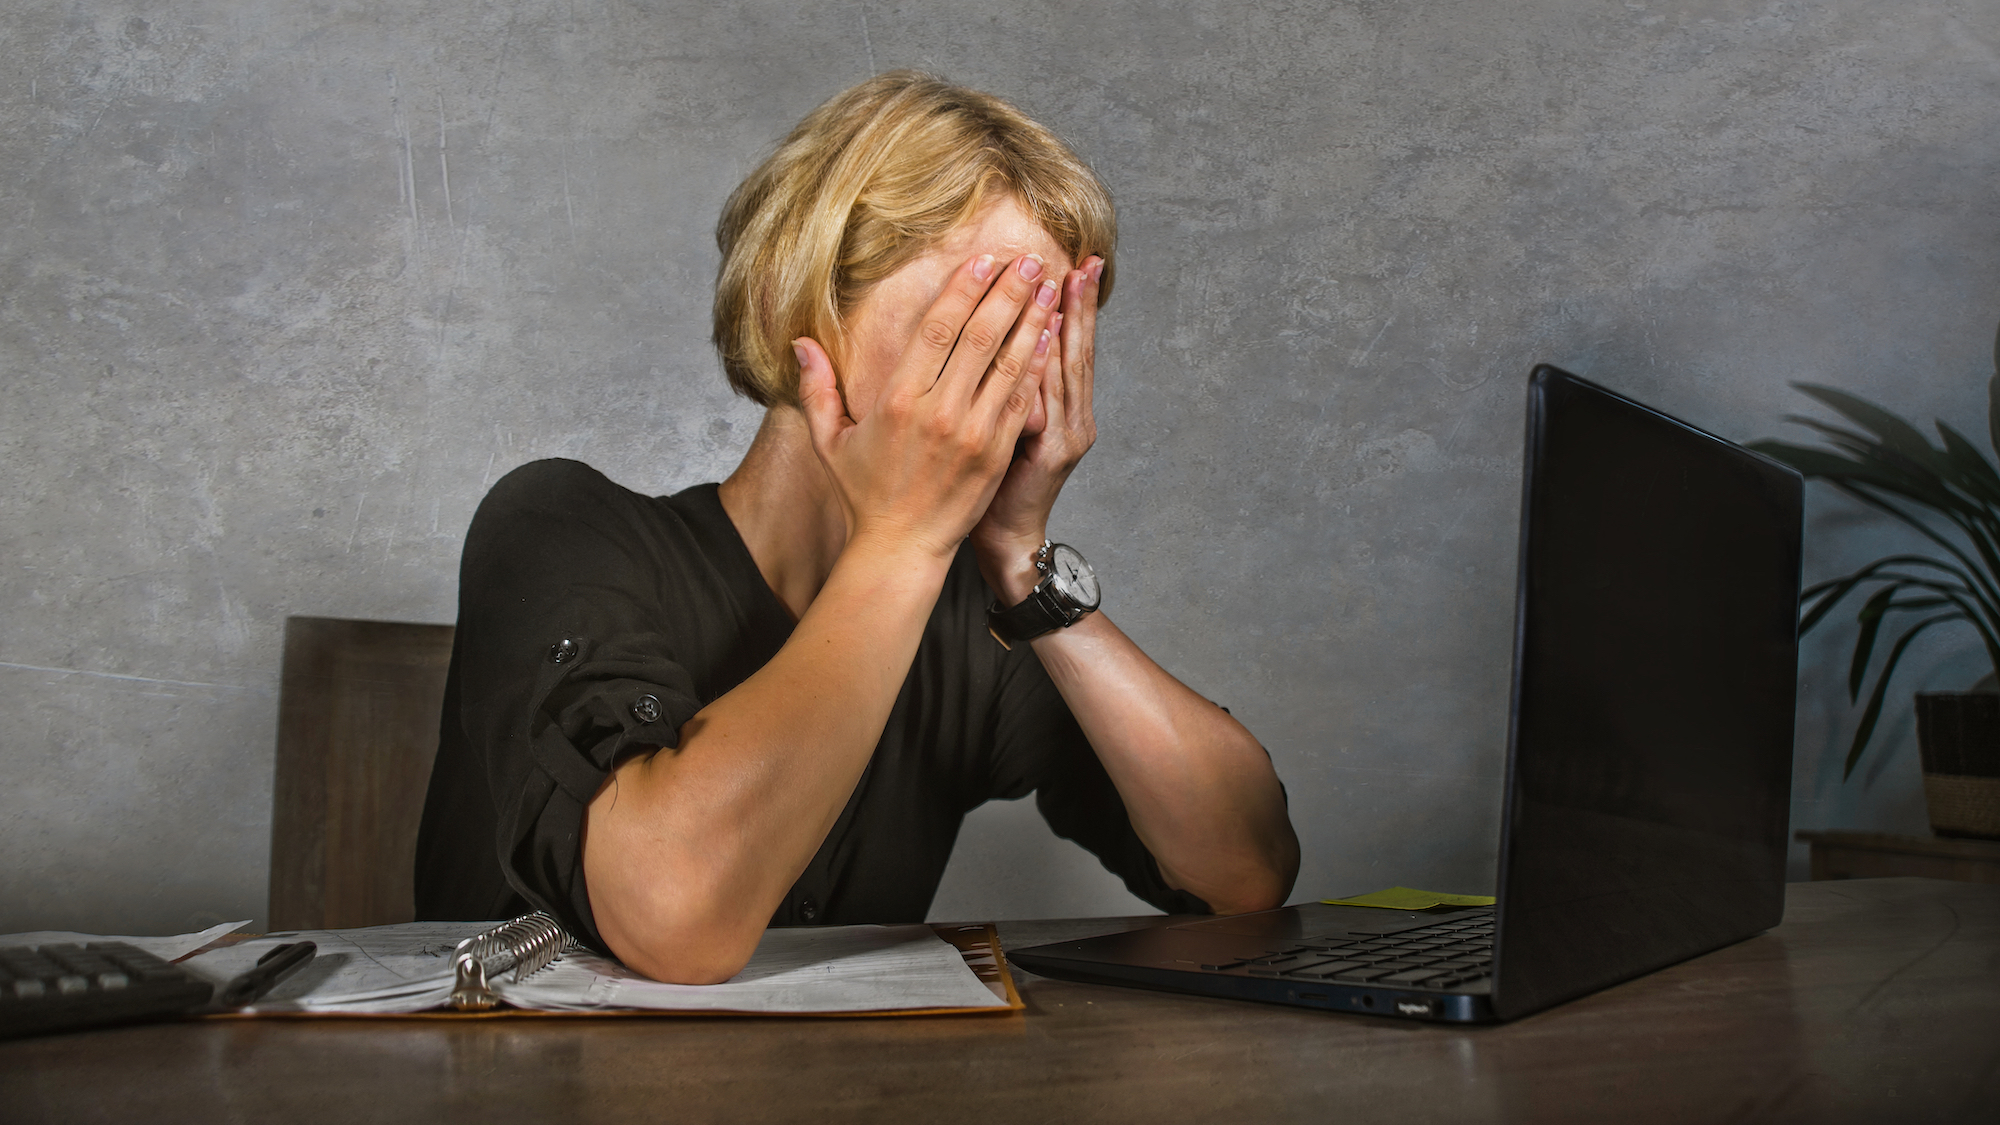 Woman covering face with hands in frustration while sitting in front of laptop on an office desk.